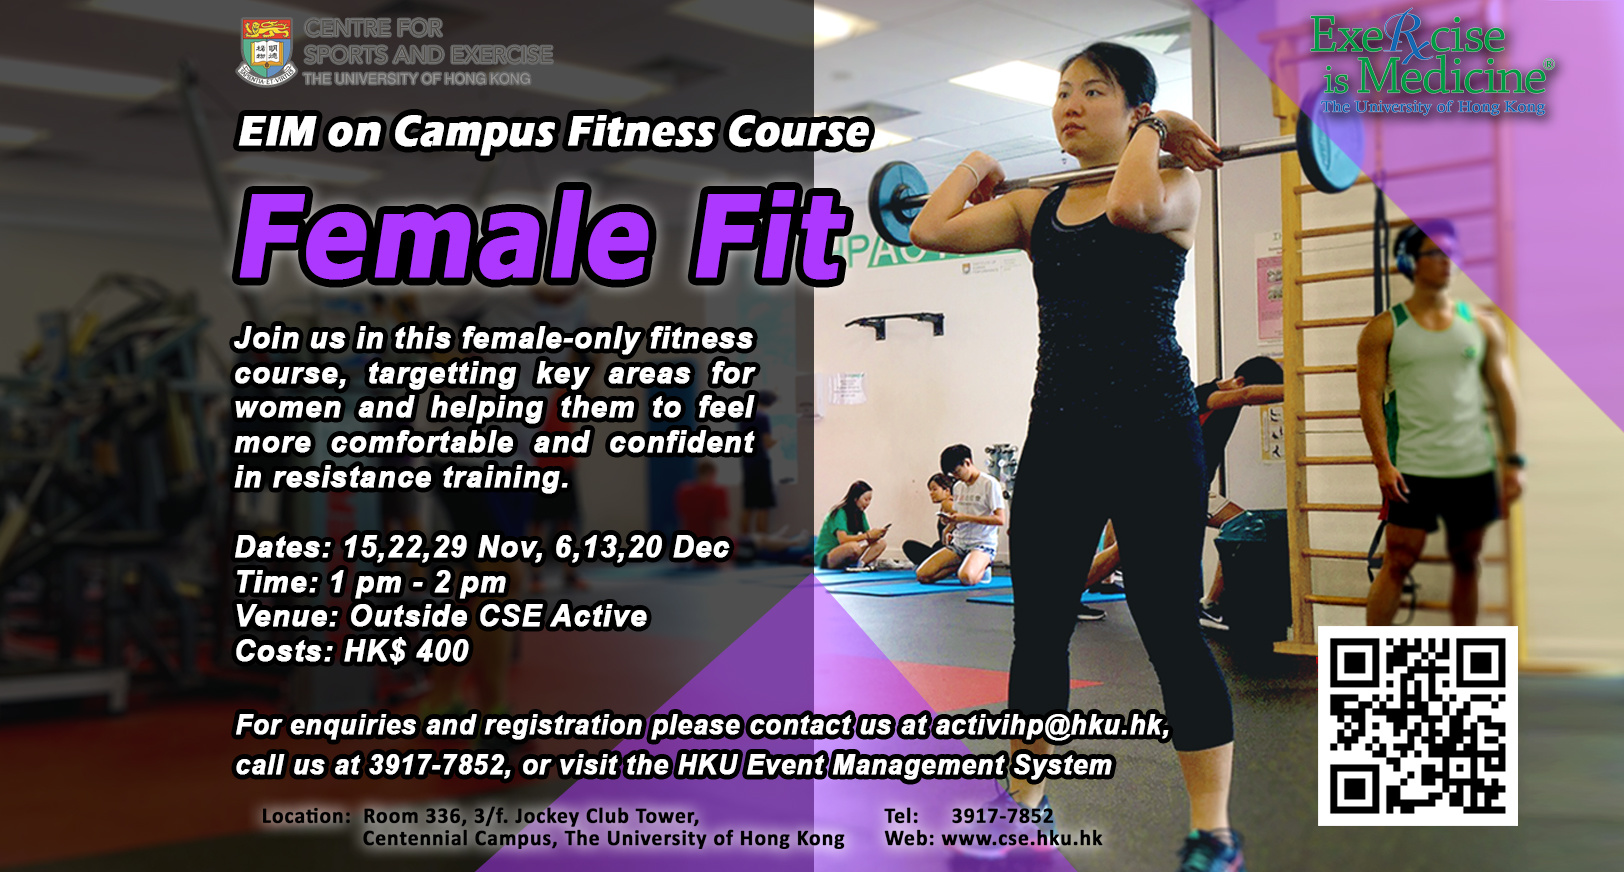 Female Fit - EIM on Campus Fitness Course